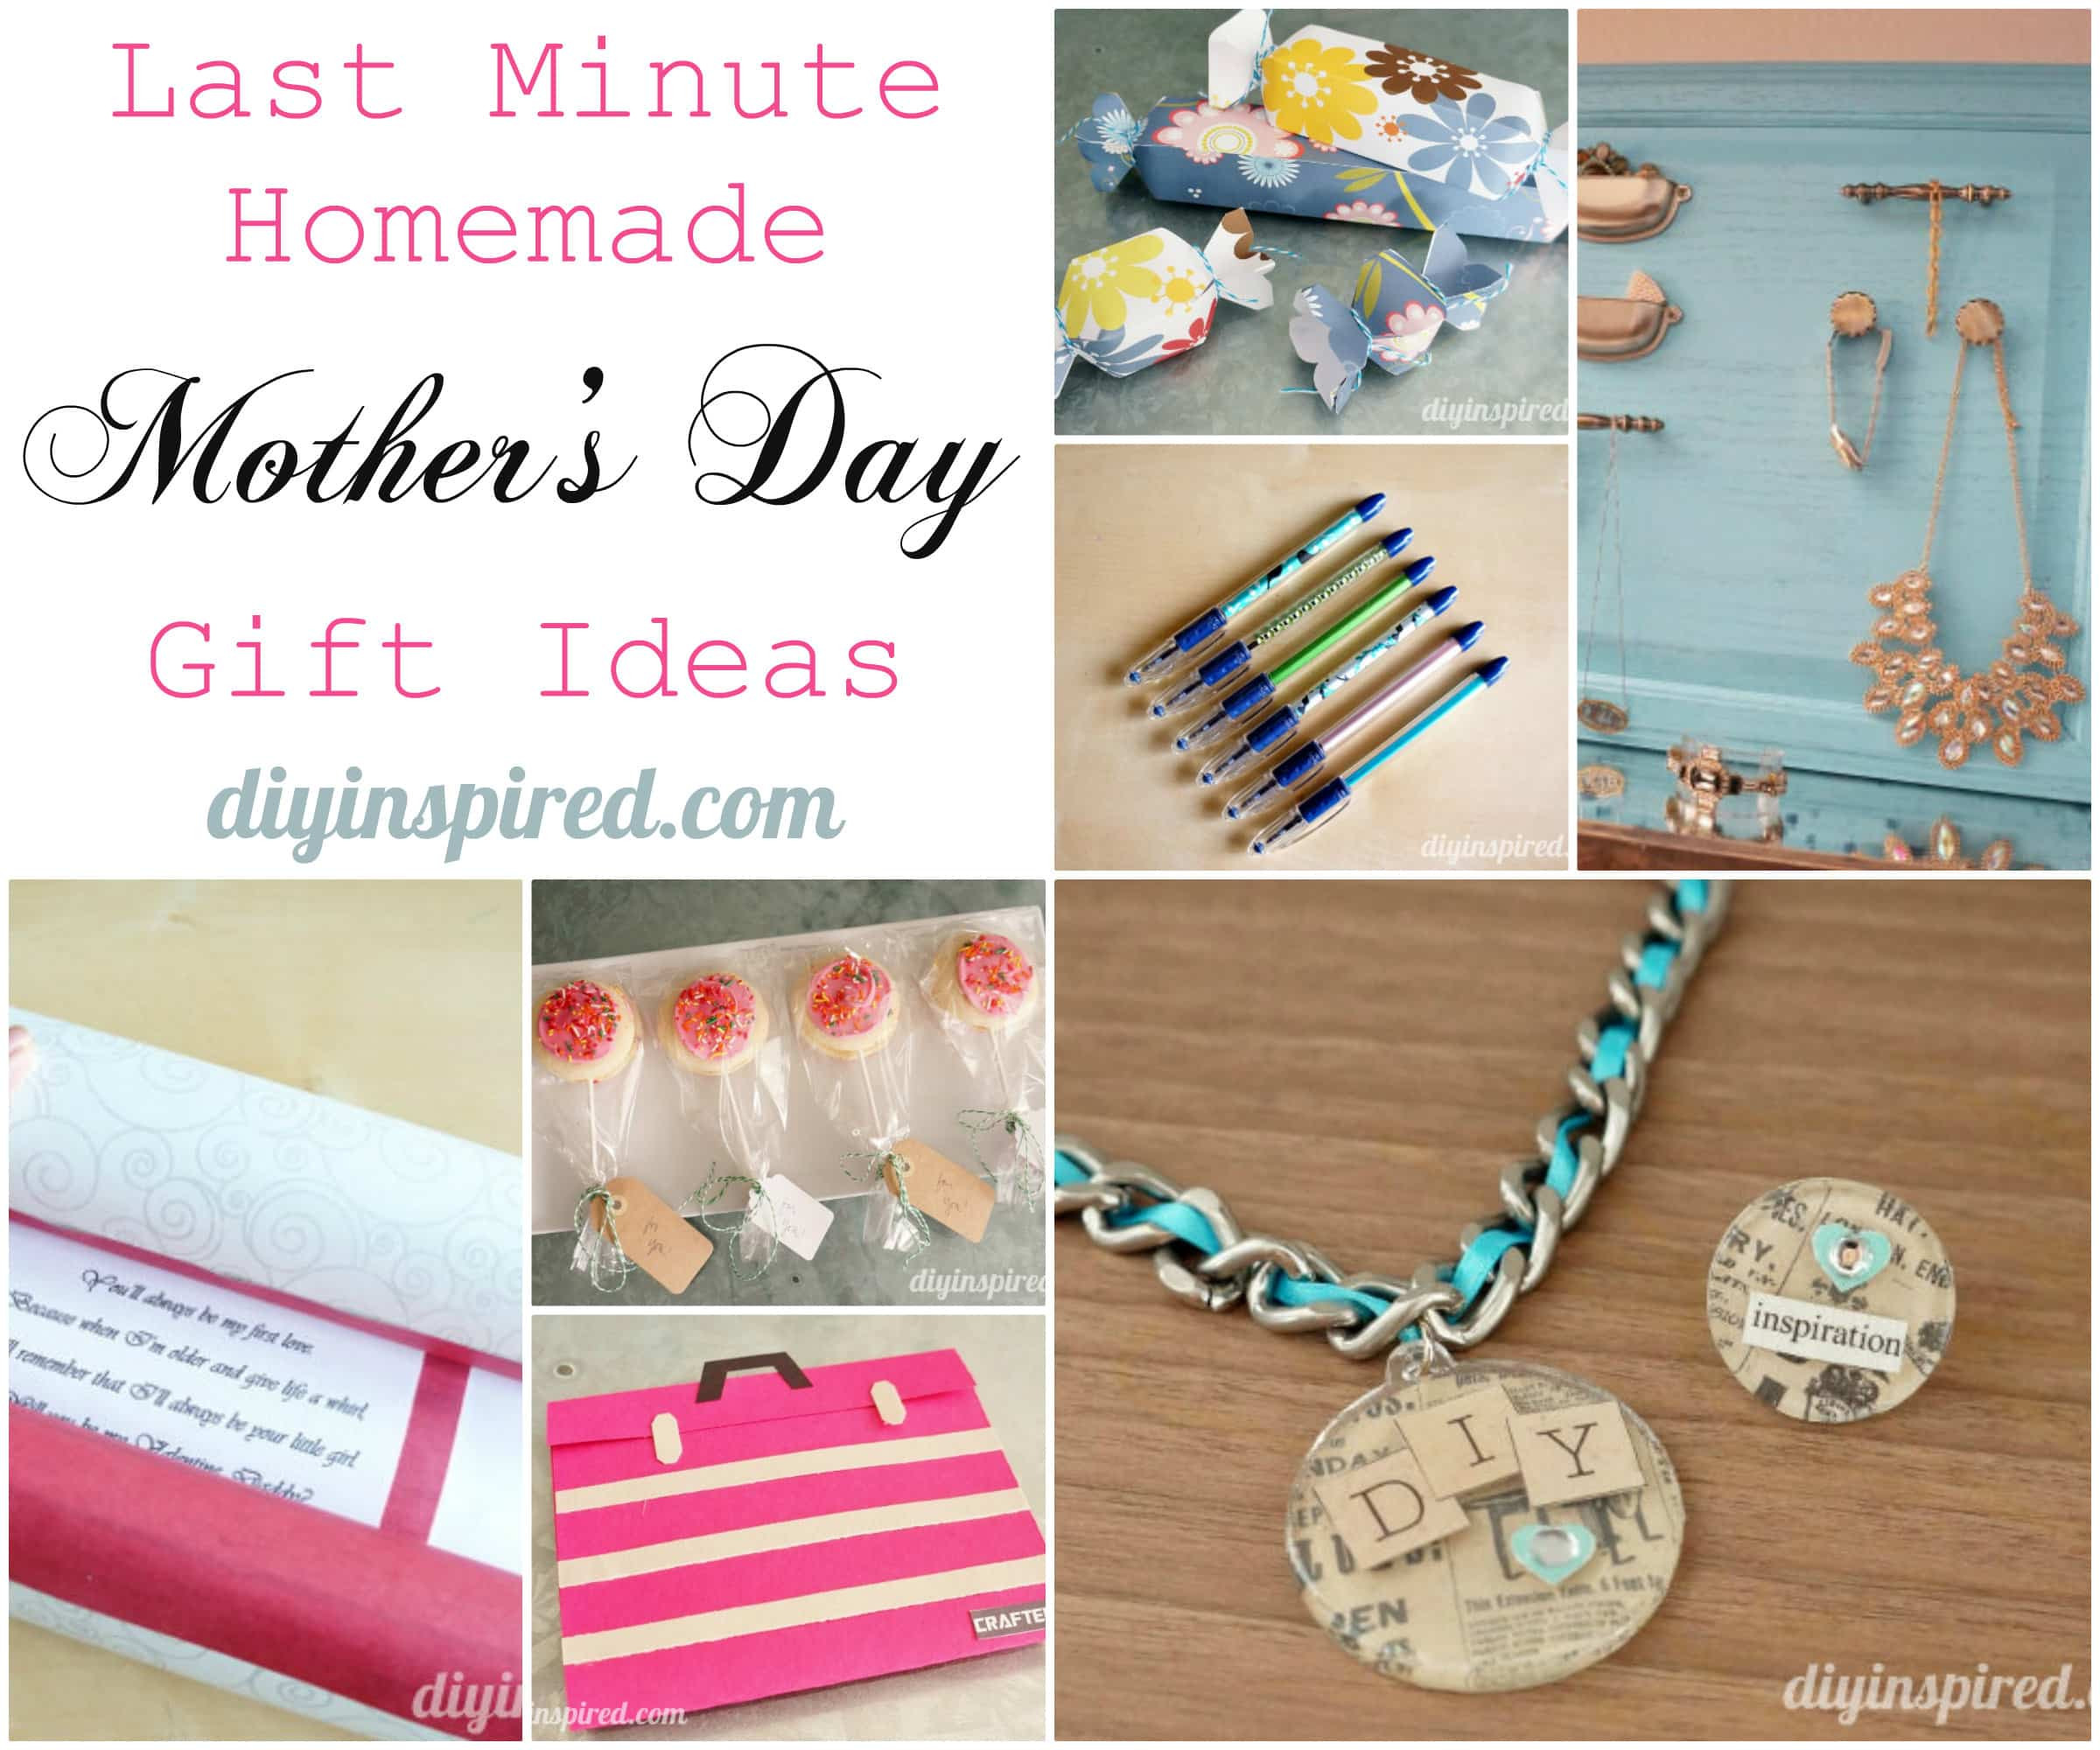 Homemade Mother Day Gift Ideas
 Last Minute Homemade Mother’s Day Gift Ideas DIY Inspired